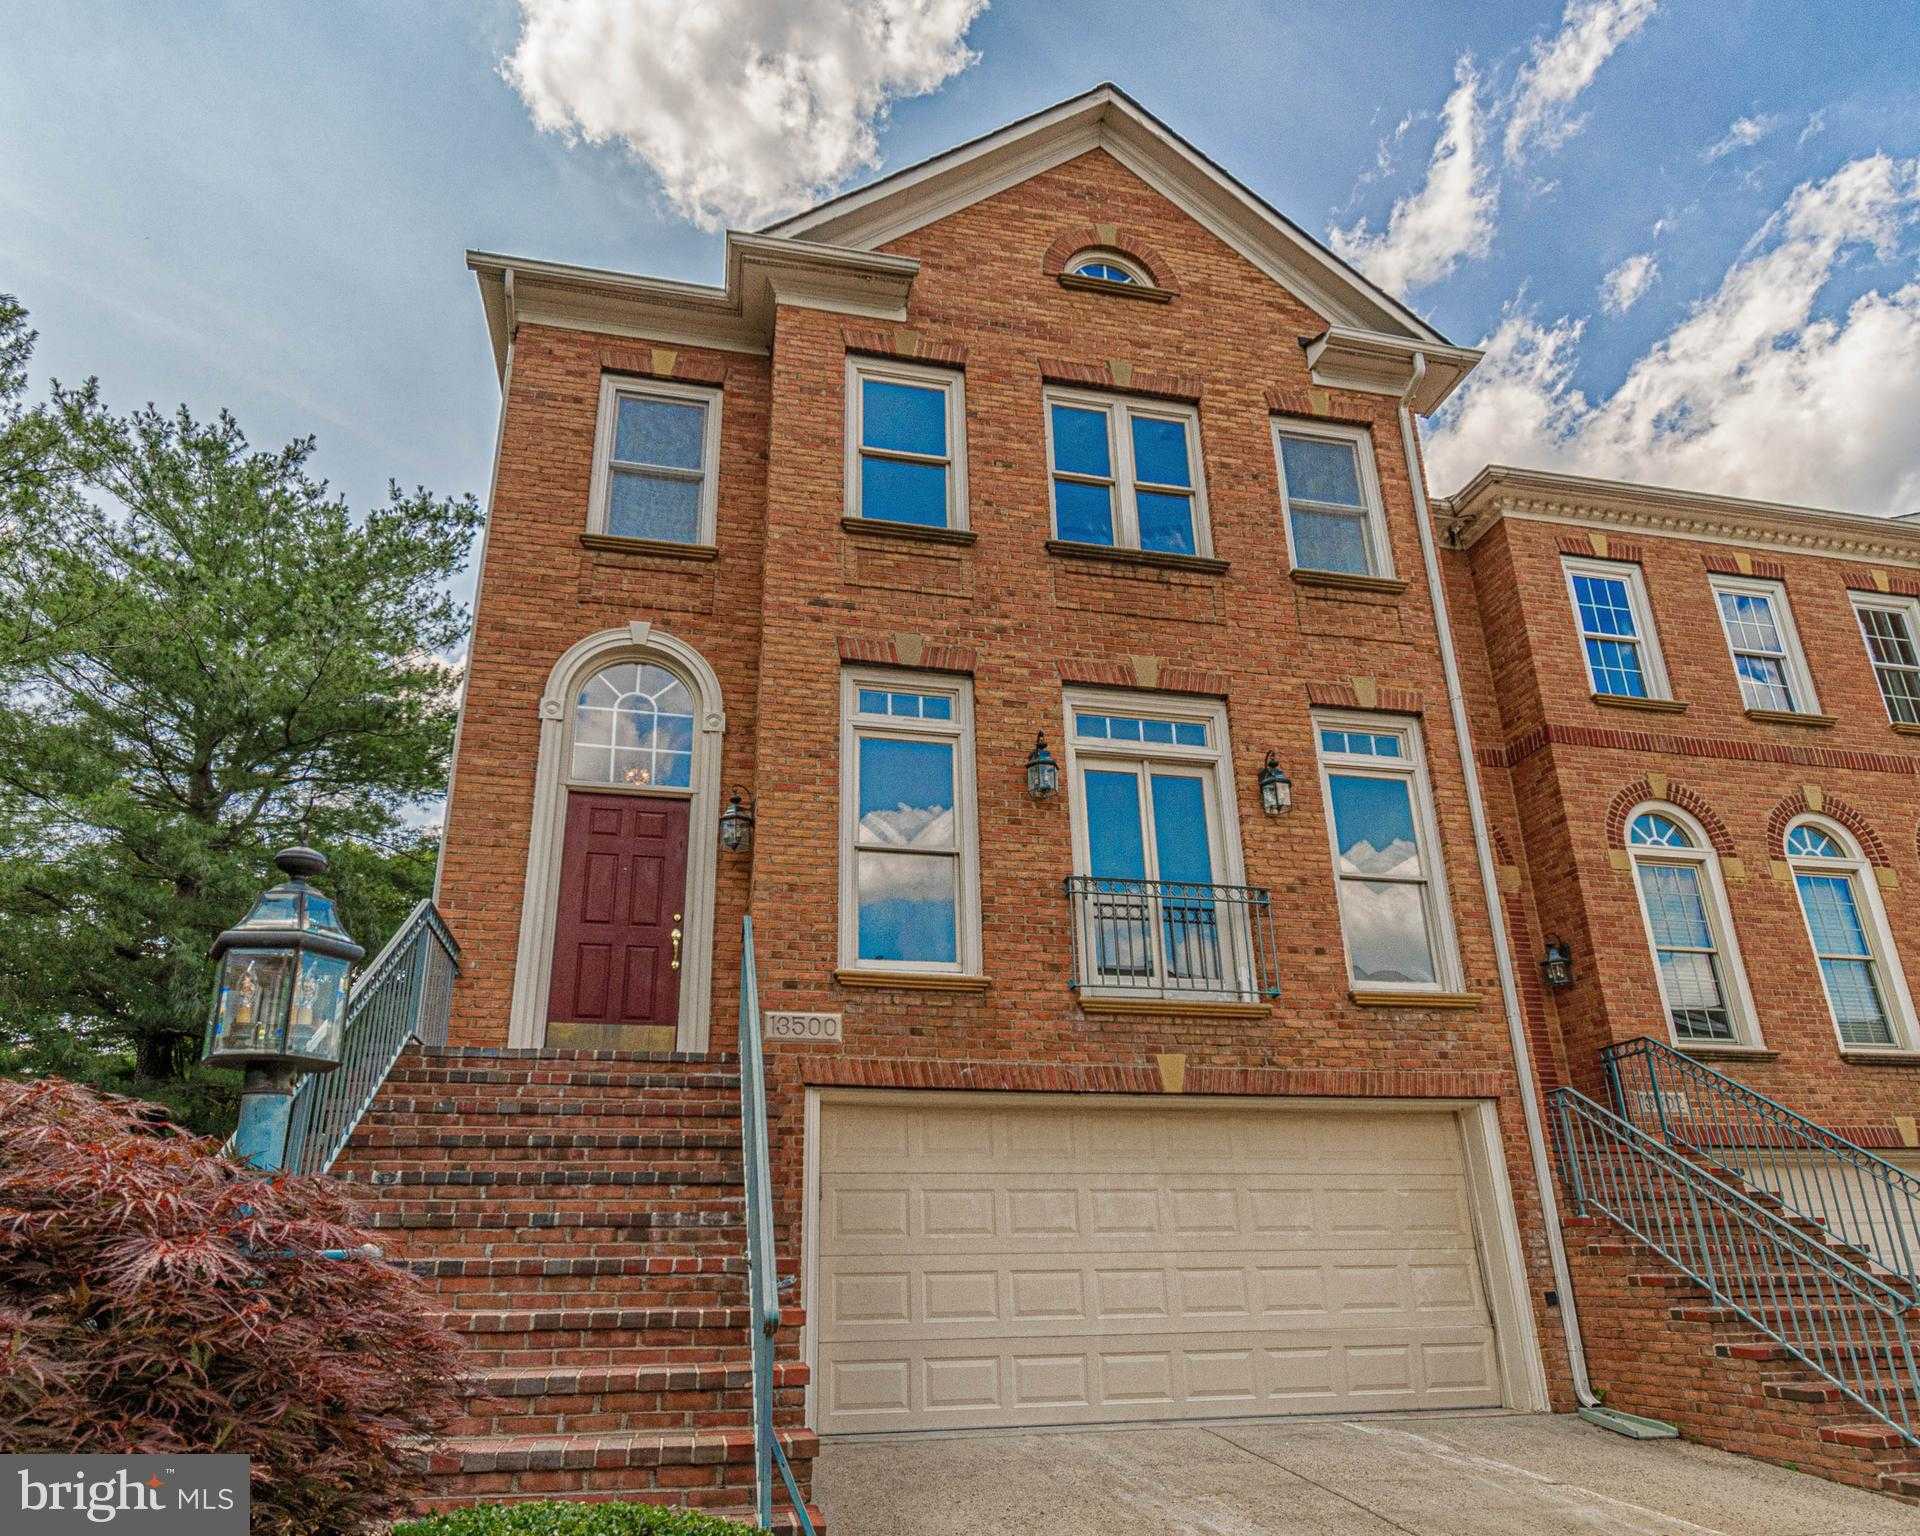 View POTOMAC, MD 20854 townhome